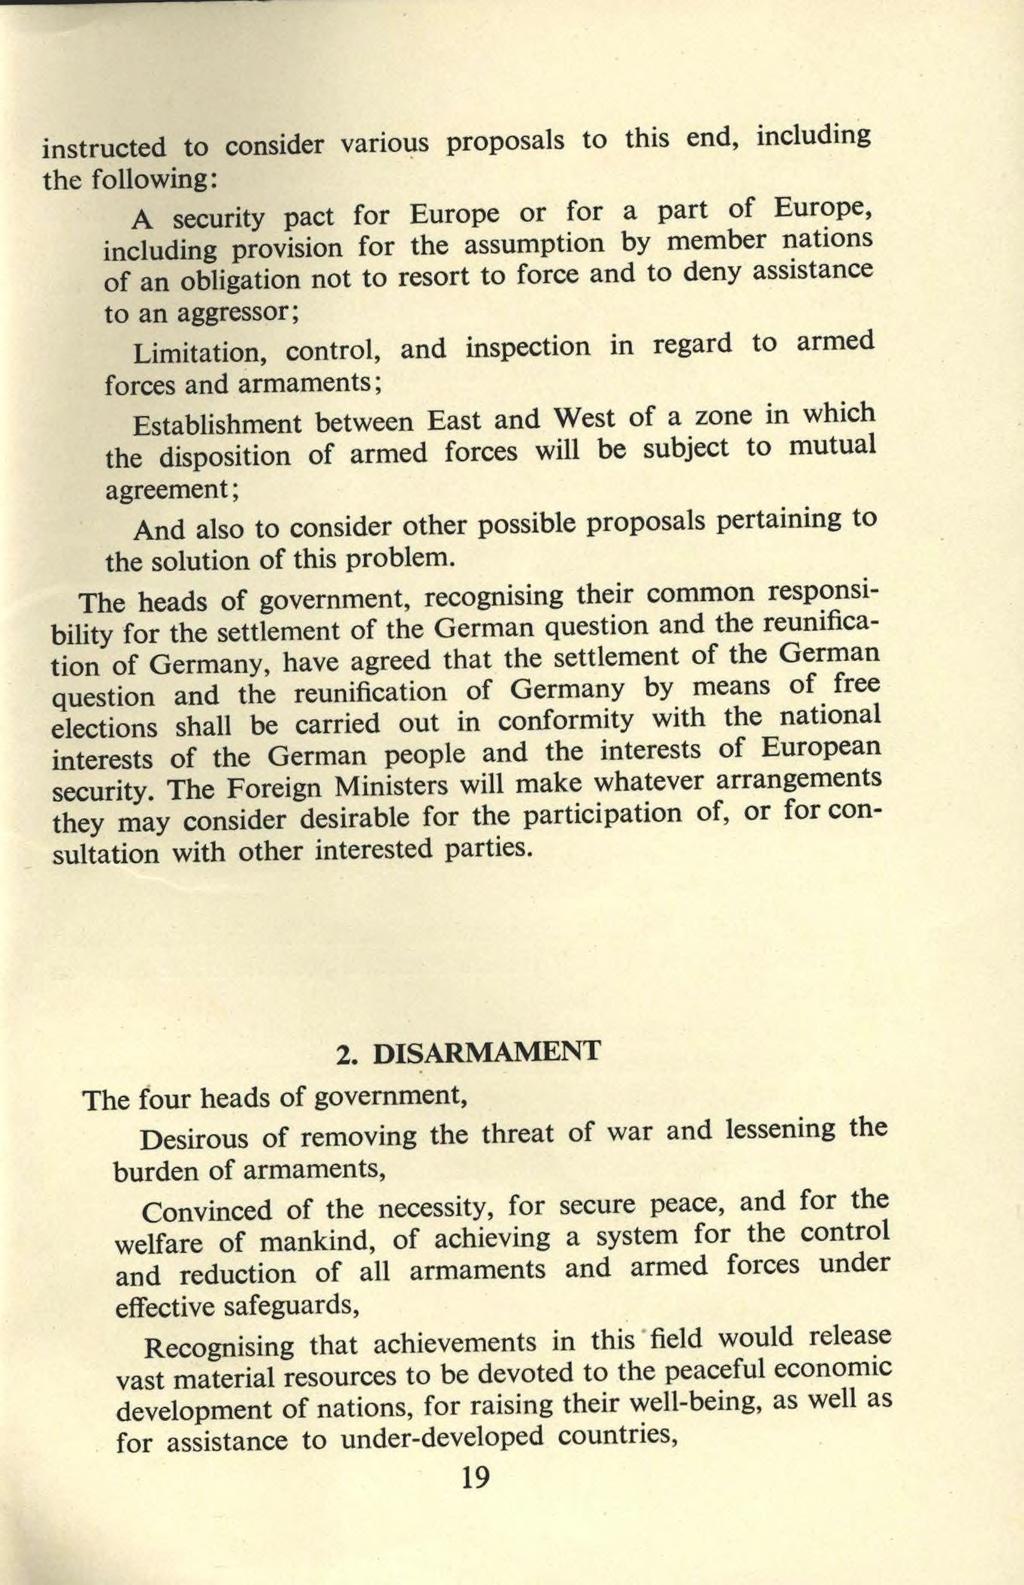 instructed to consider various proposals to this end, including the following: A security pact for Europe or for a part of Europe, including provision for the assumption by member nations of an